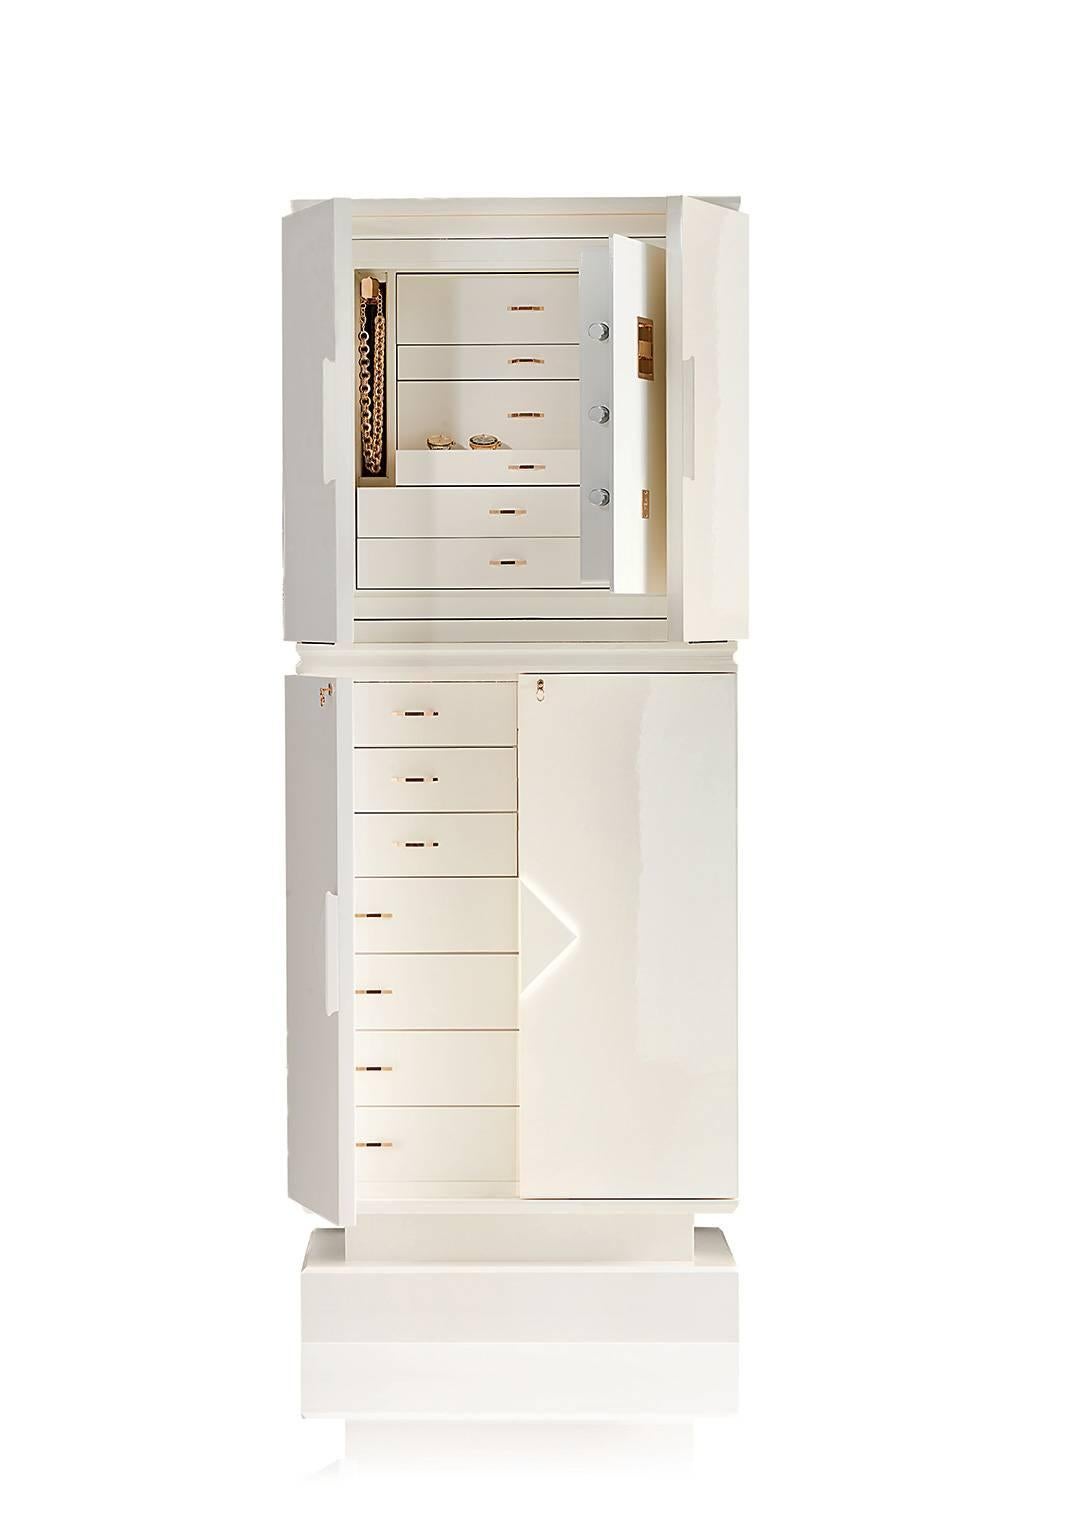 Magia Bianca is a contemporary armored jewelry armoire safe in white, polished, Bird's eye Maple. Pull-out necklace bar. Brass, 24-karat gold-plated accessories. Inside of safe is shiny white.
Made in Florence, Italy by Agresti since 1949.
 